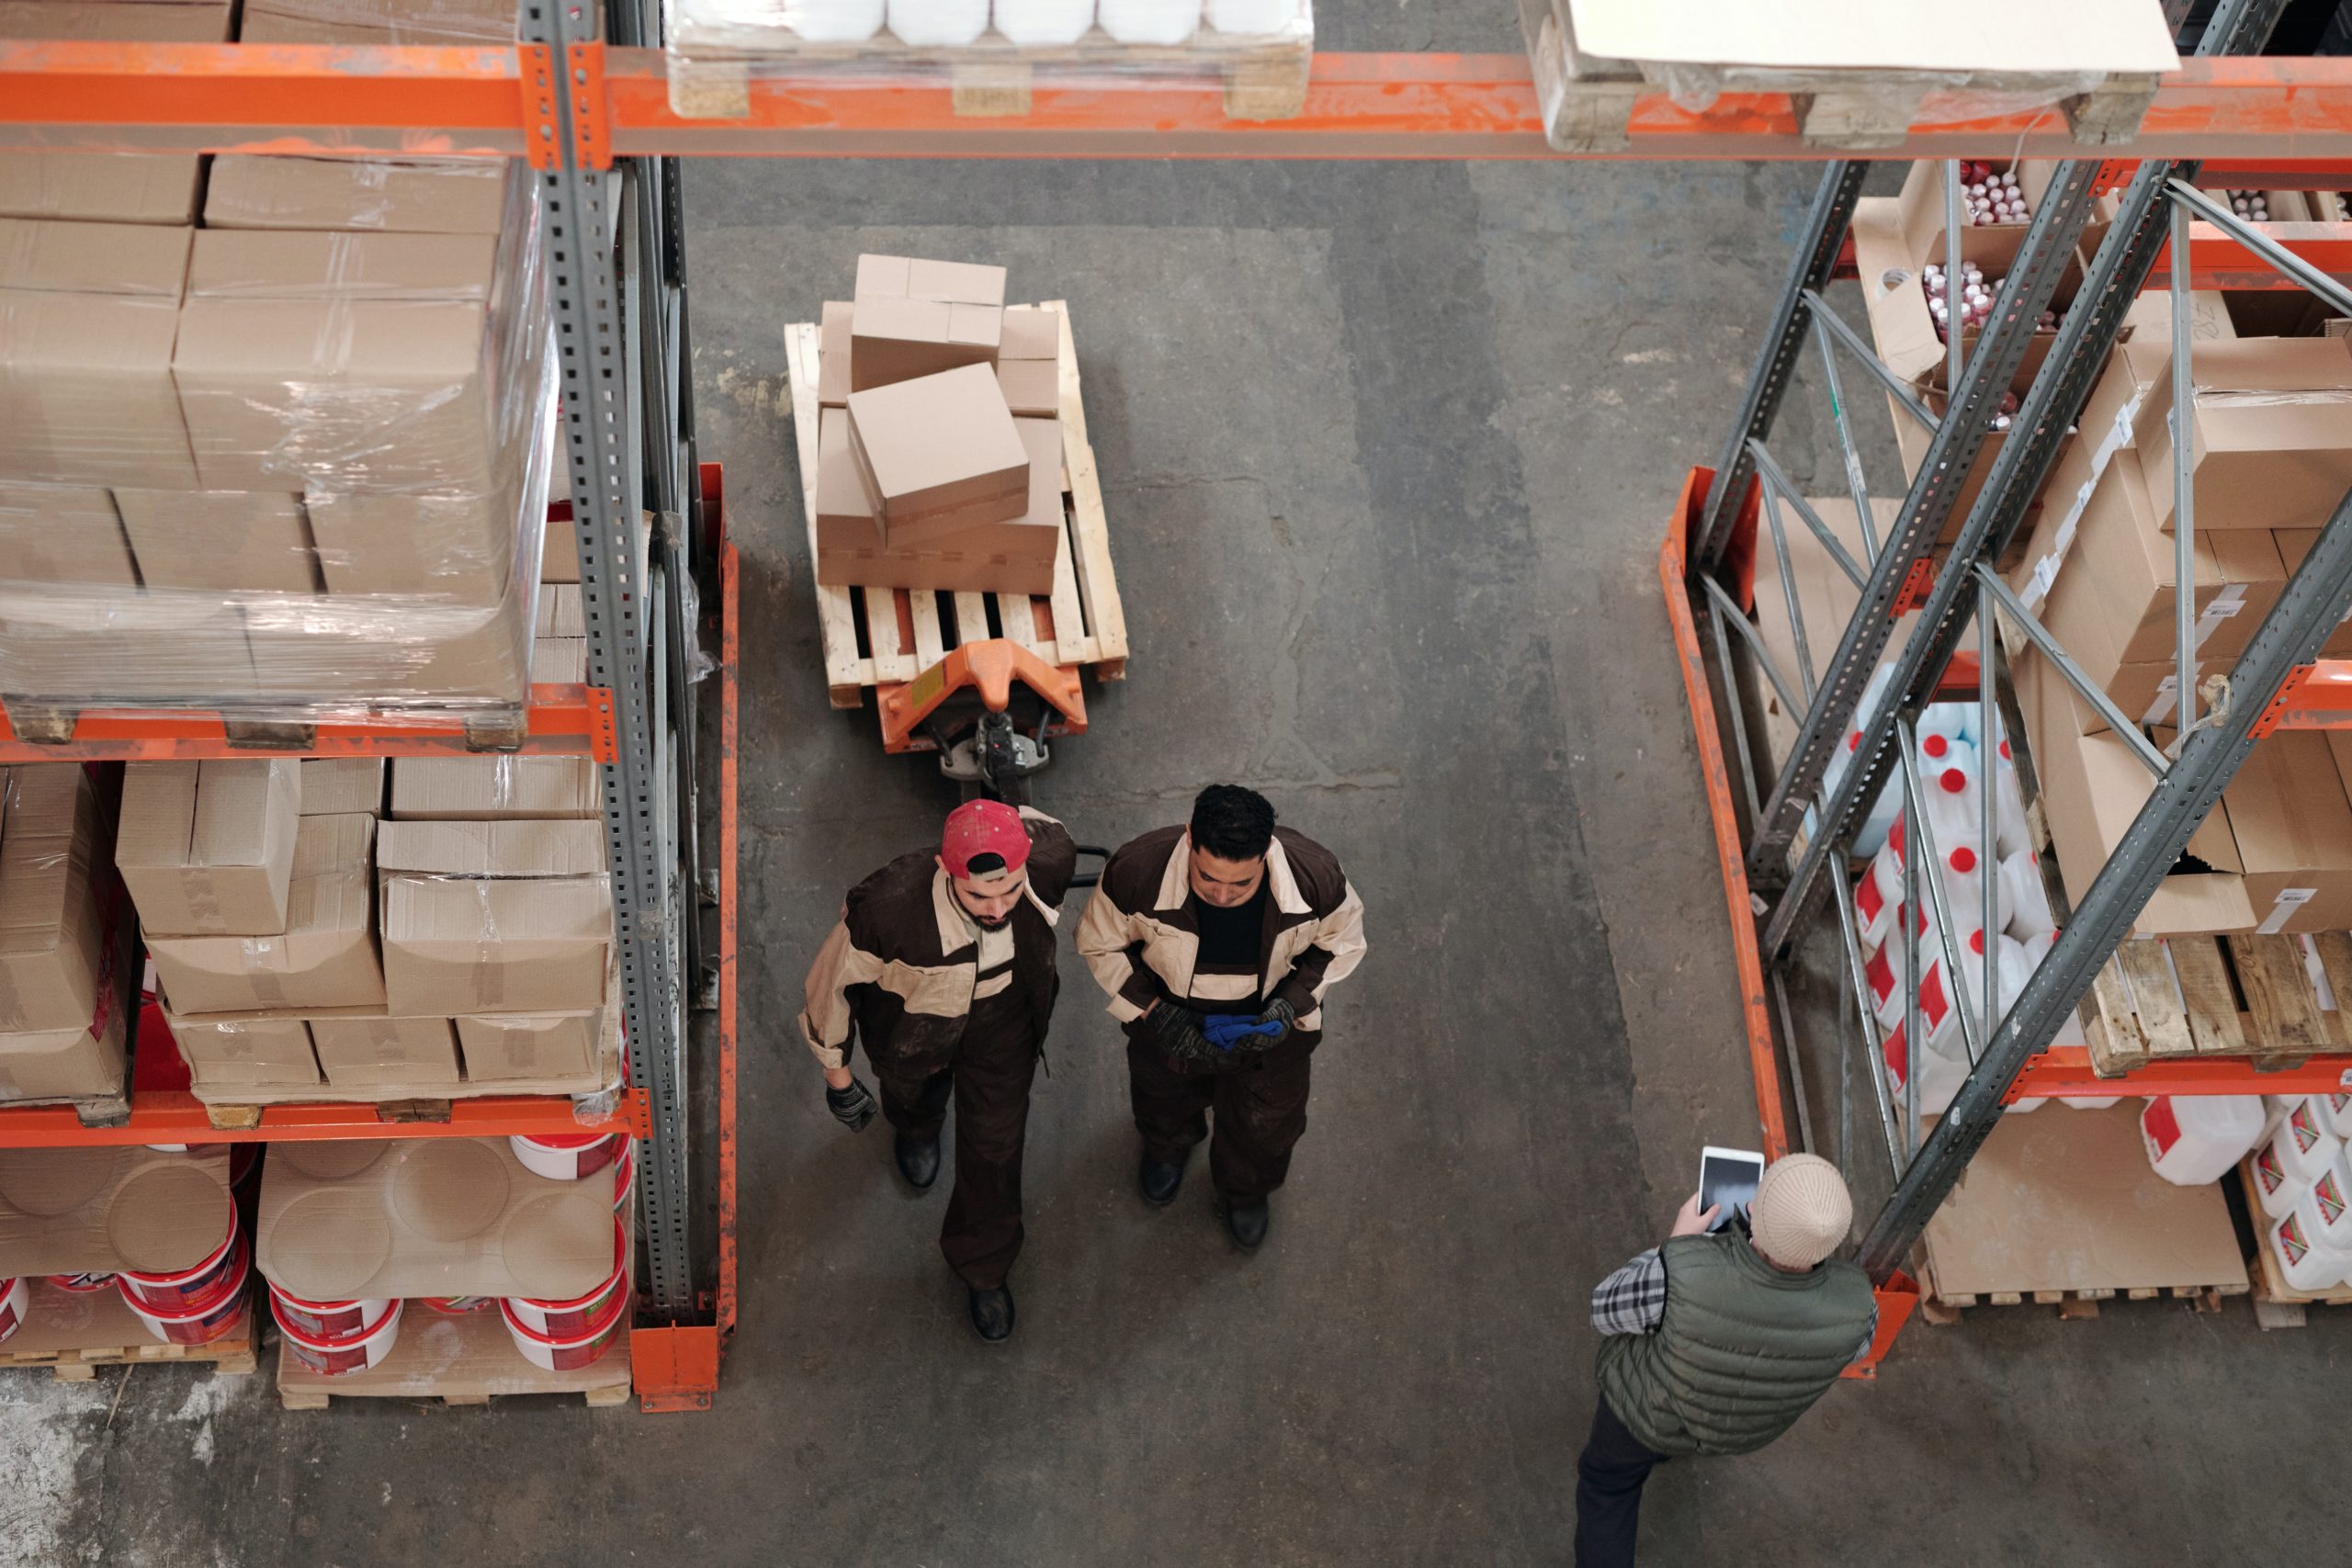 employees moving packages in warehouse, surrounded by shelves filled with boxes